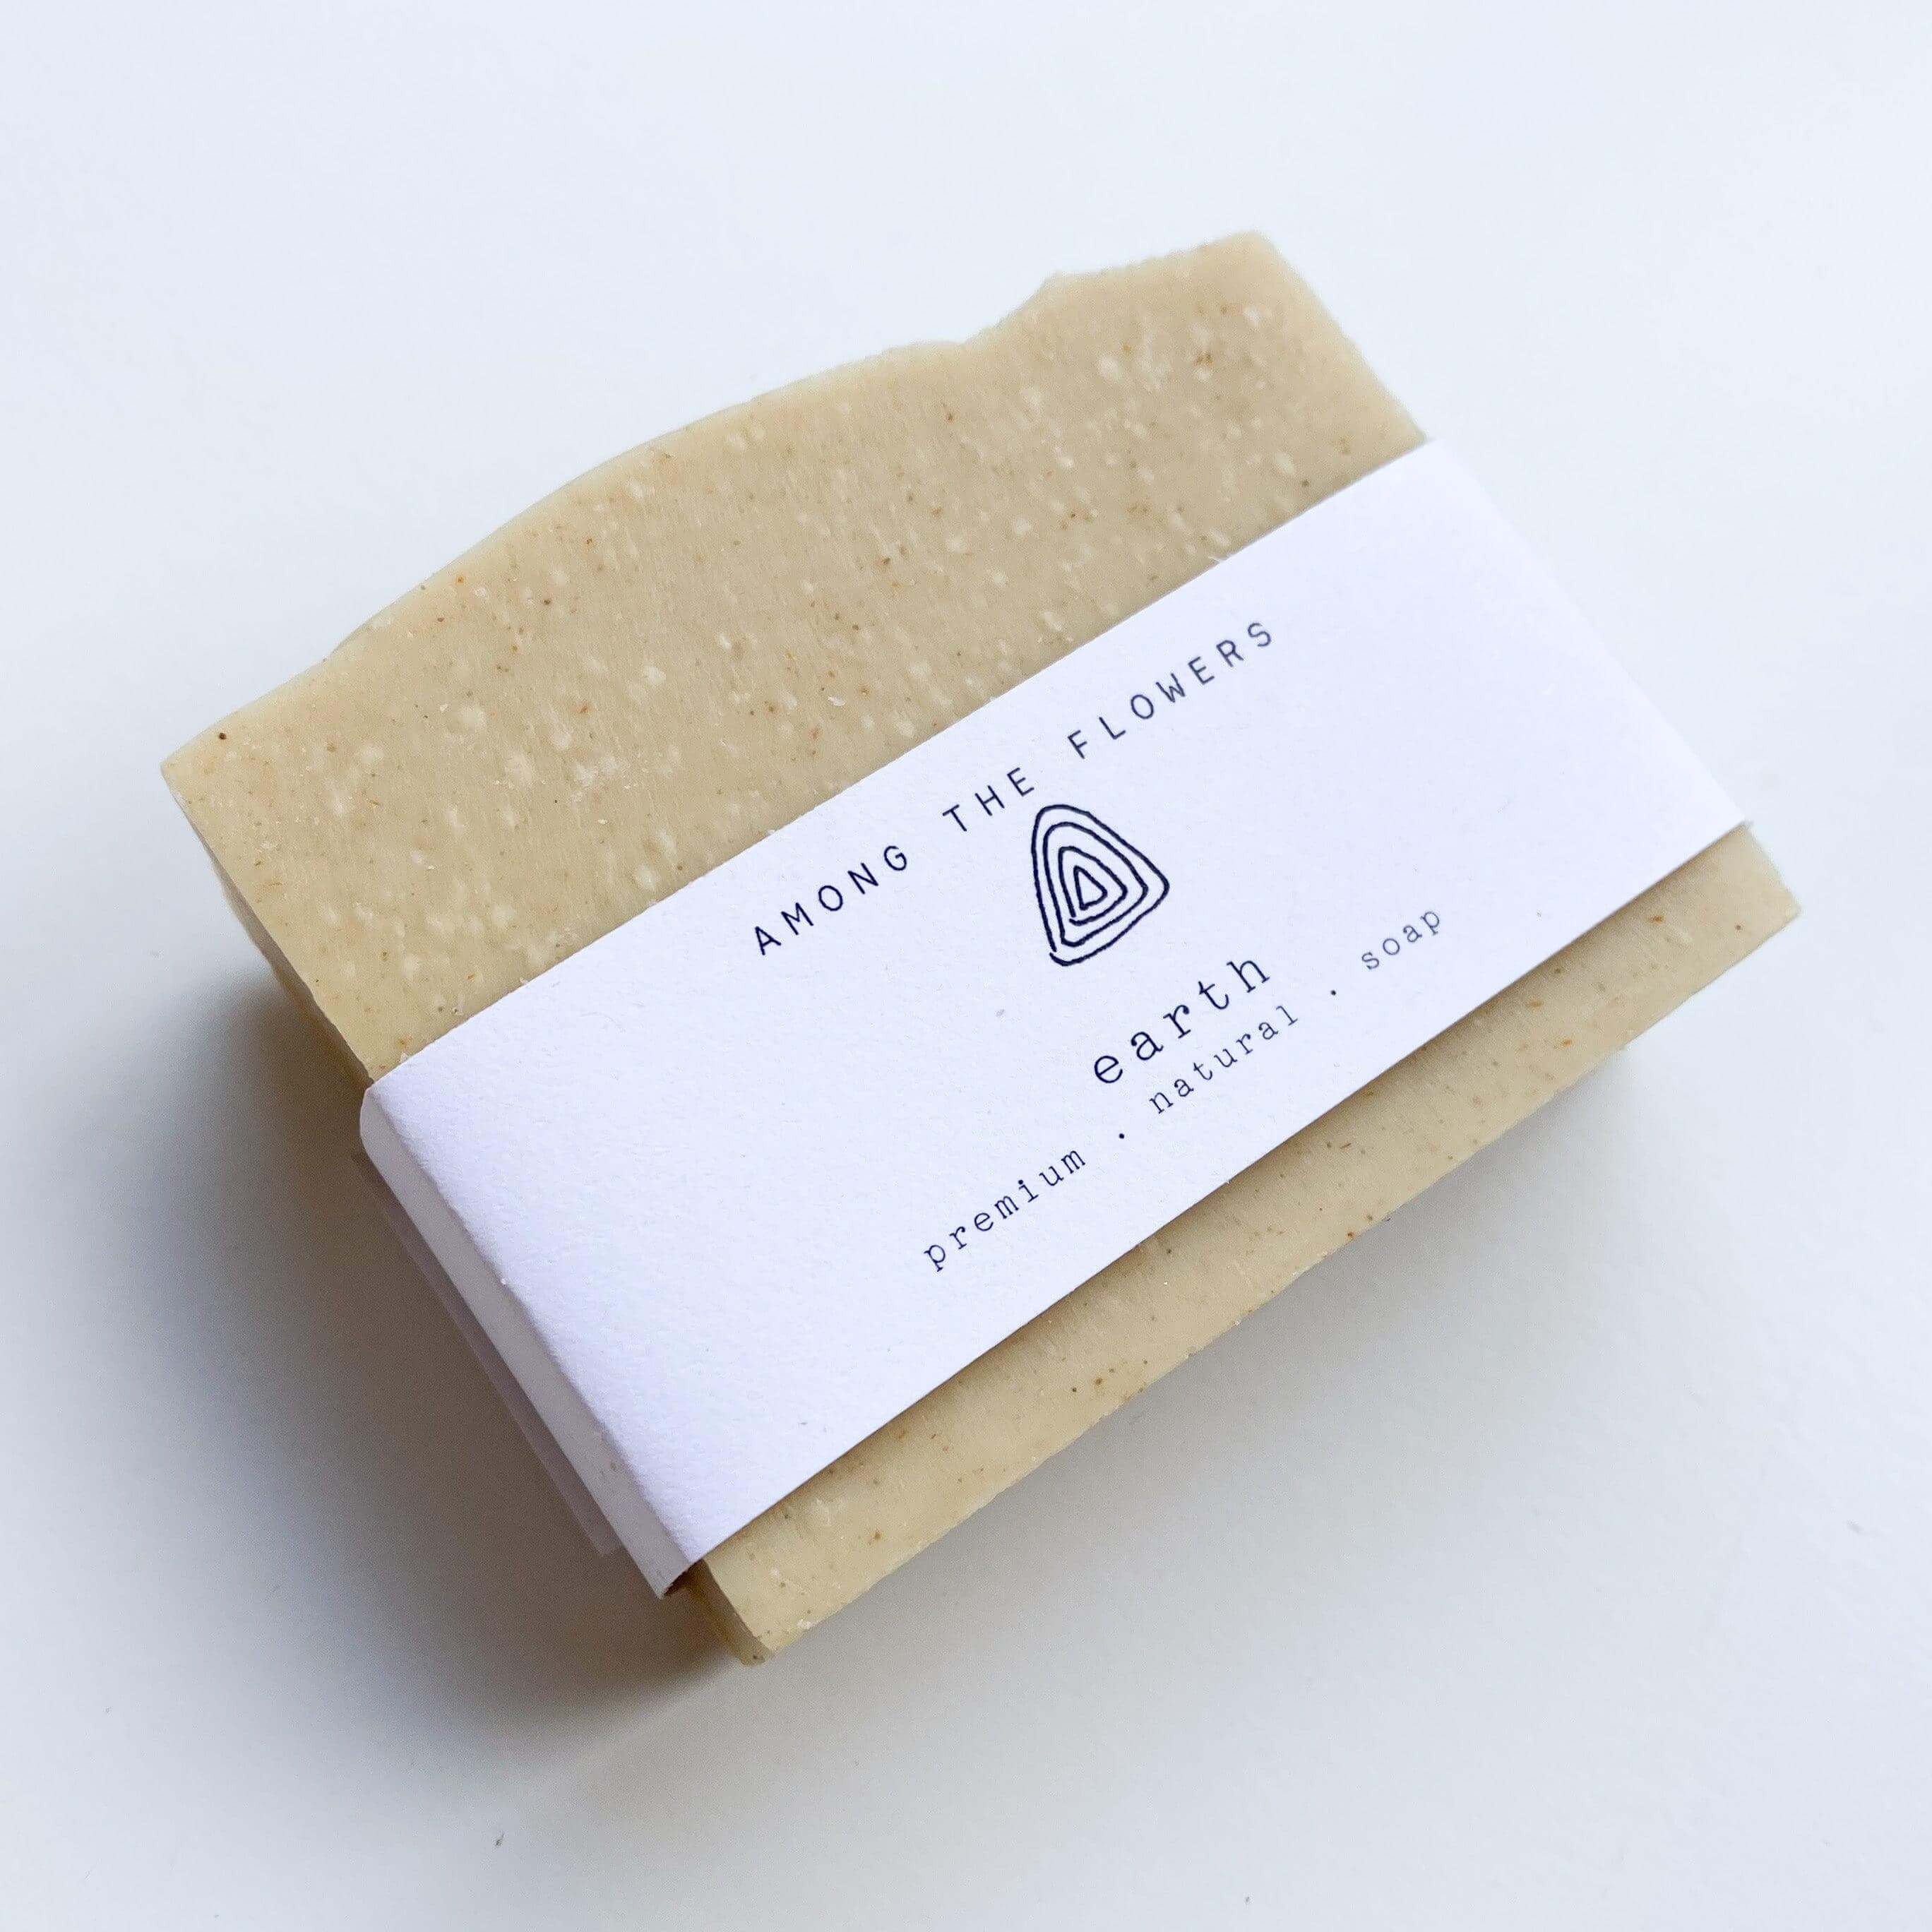 Cold Processed Soap - Sprig Flower Co